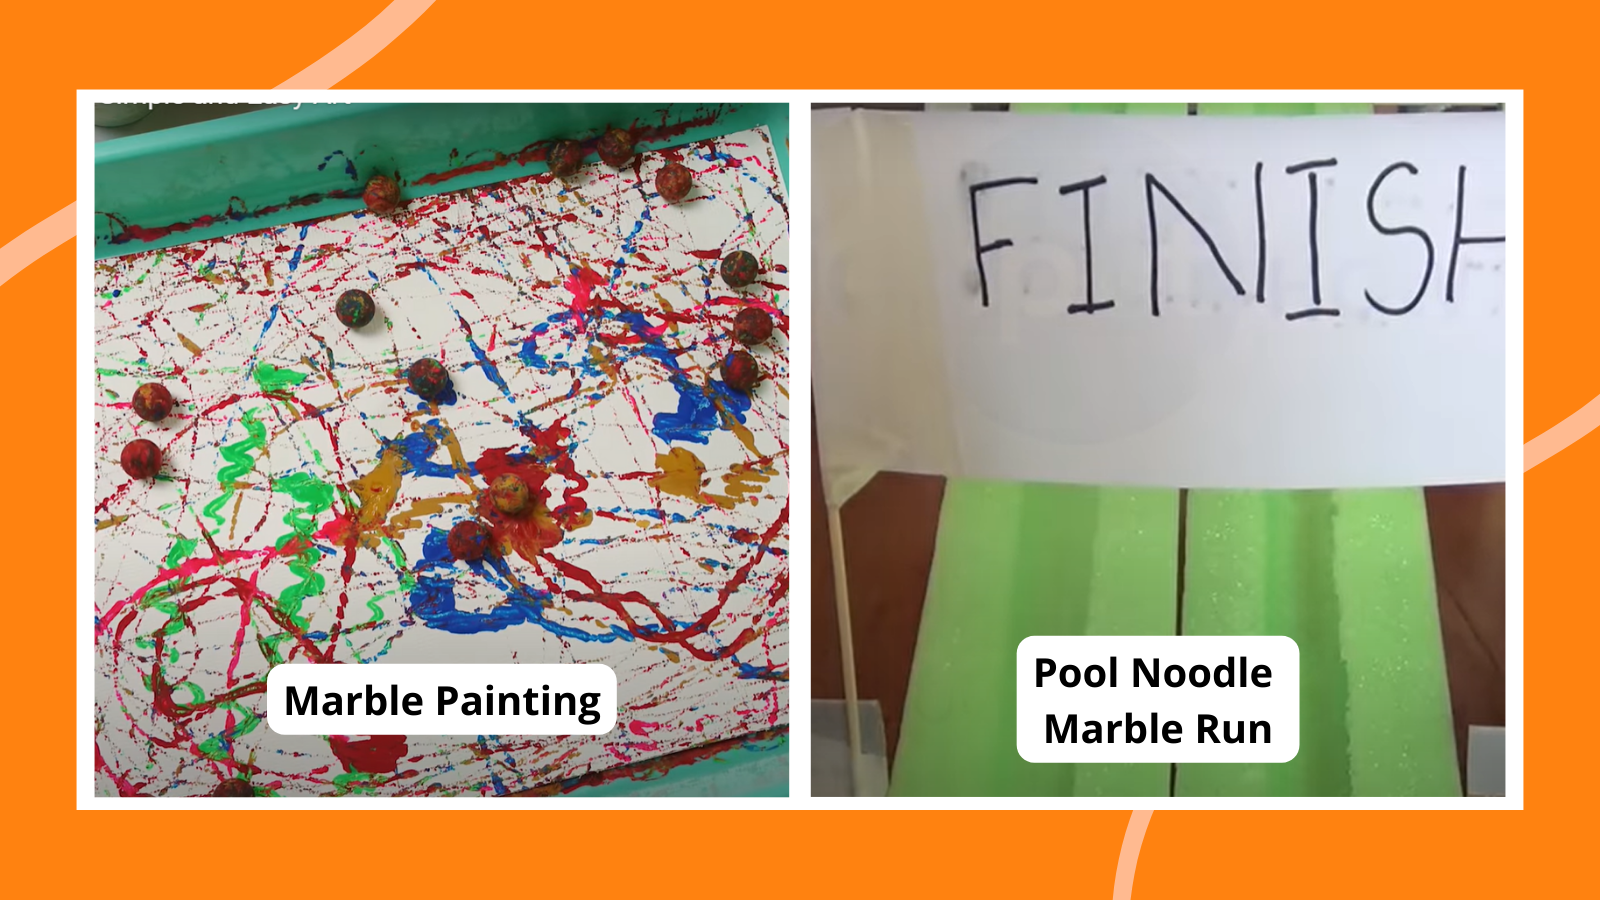 Examples of marble games including marble painting and pool noodle marble run.